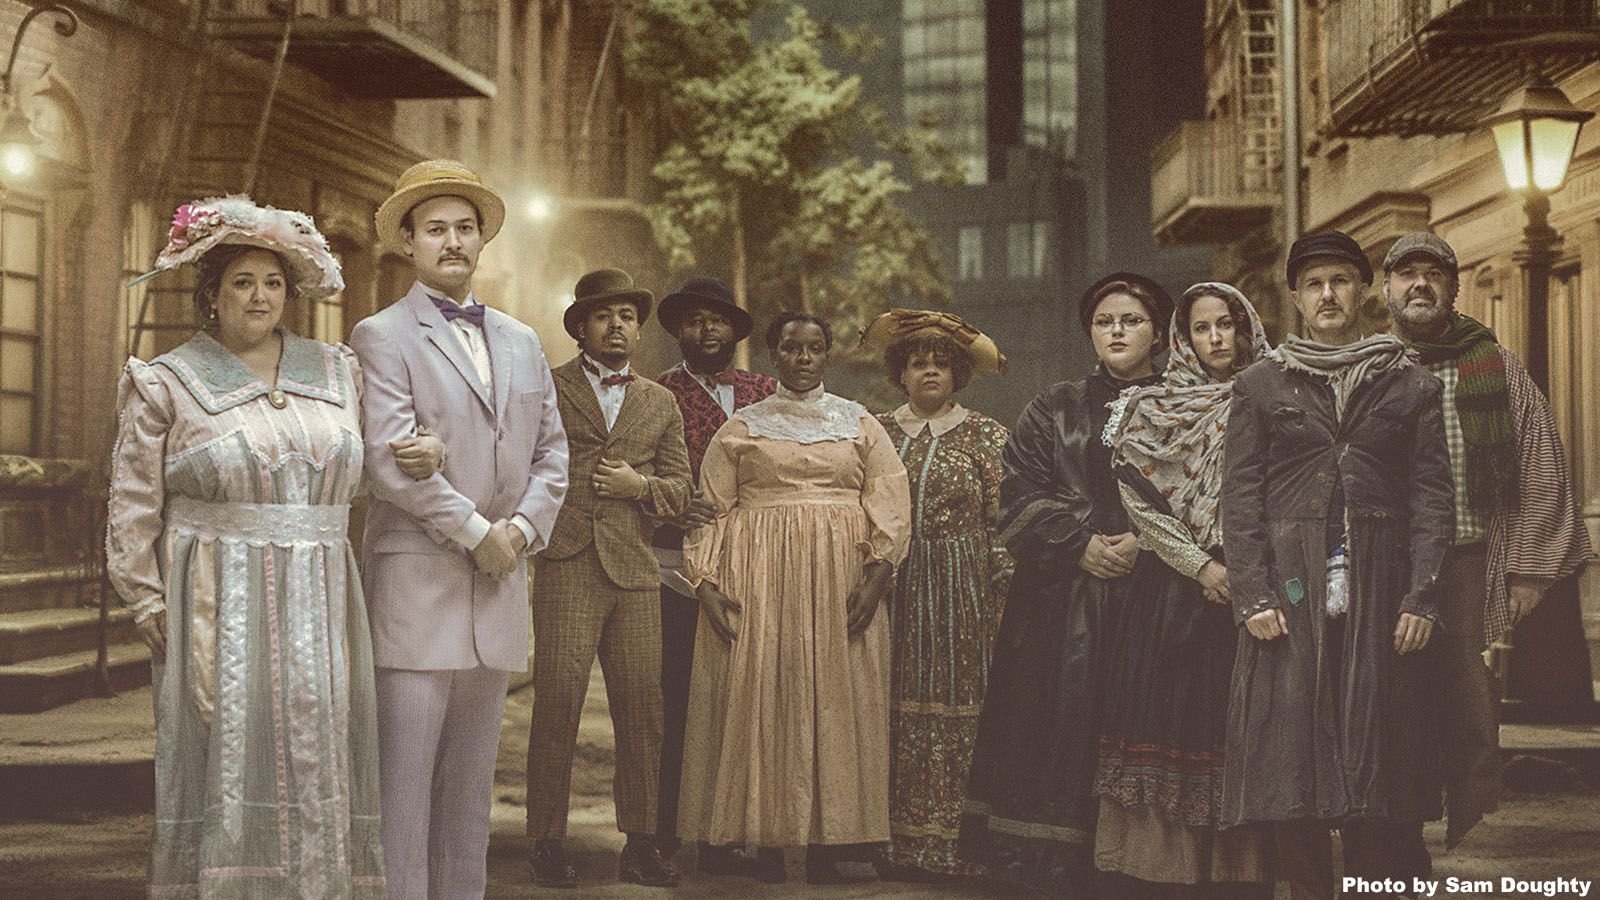 Genesis Outreach will put on Ragtime the Musical at University of Saint Francis’ Robert Goldstine Performing Arts Center.